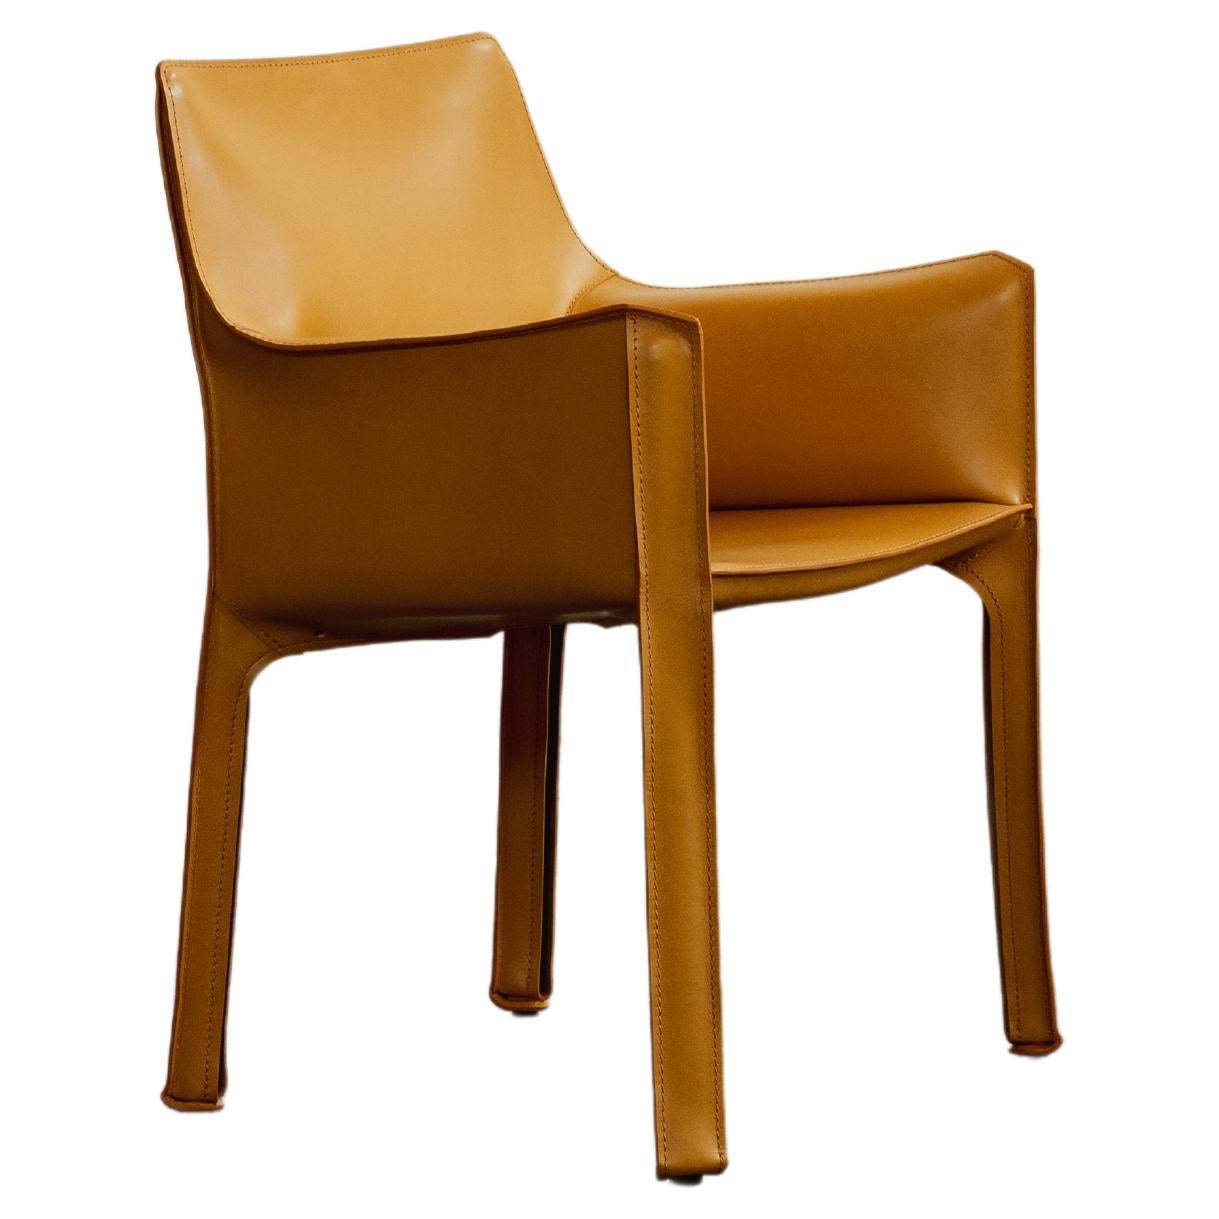 Mario Bellini "CAB 413” Dining Chairs for Cassina, 1977 For Sale